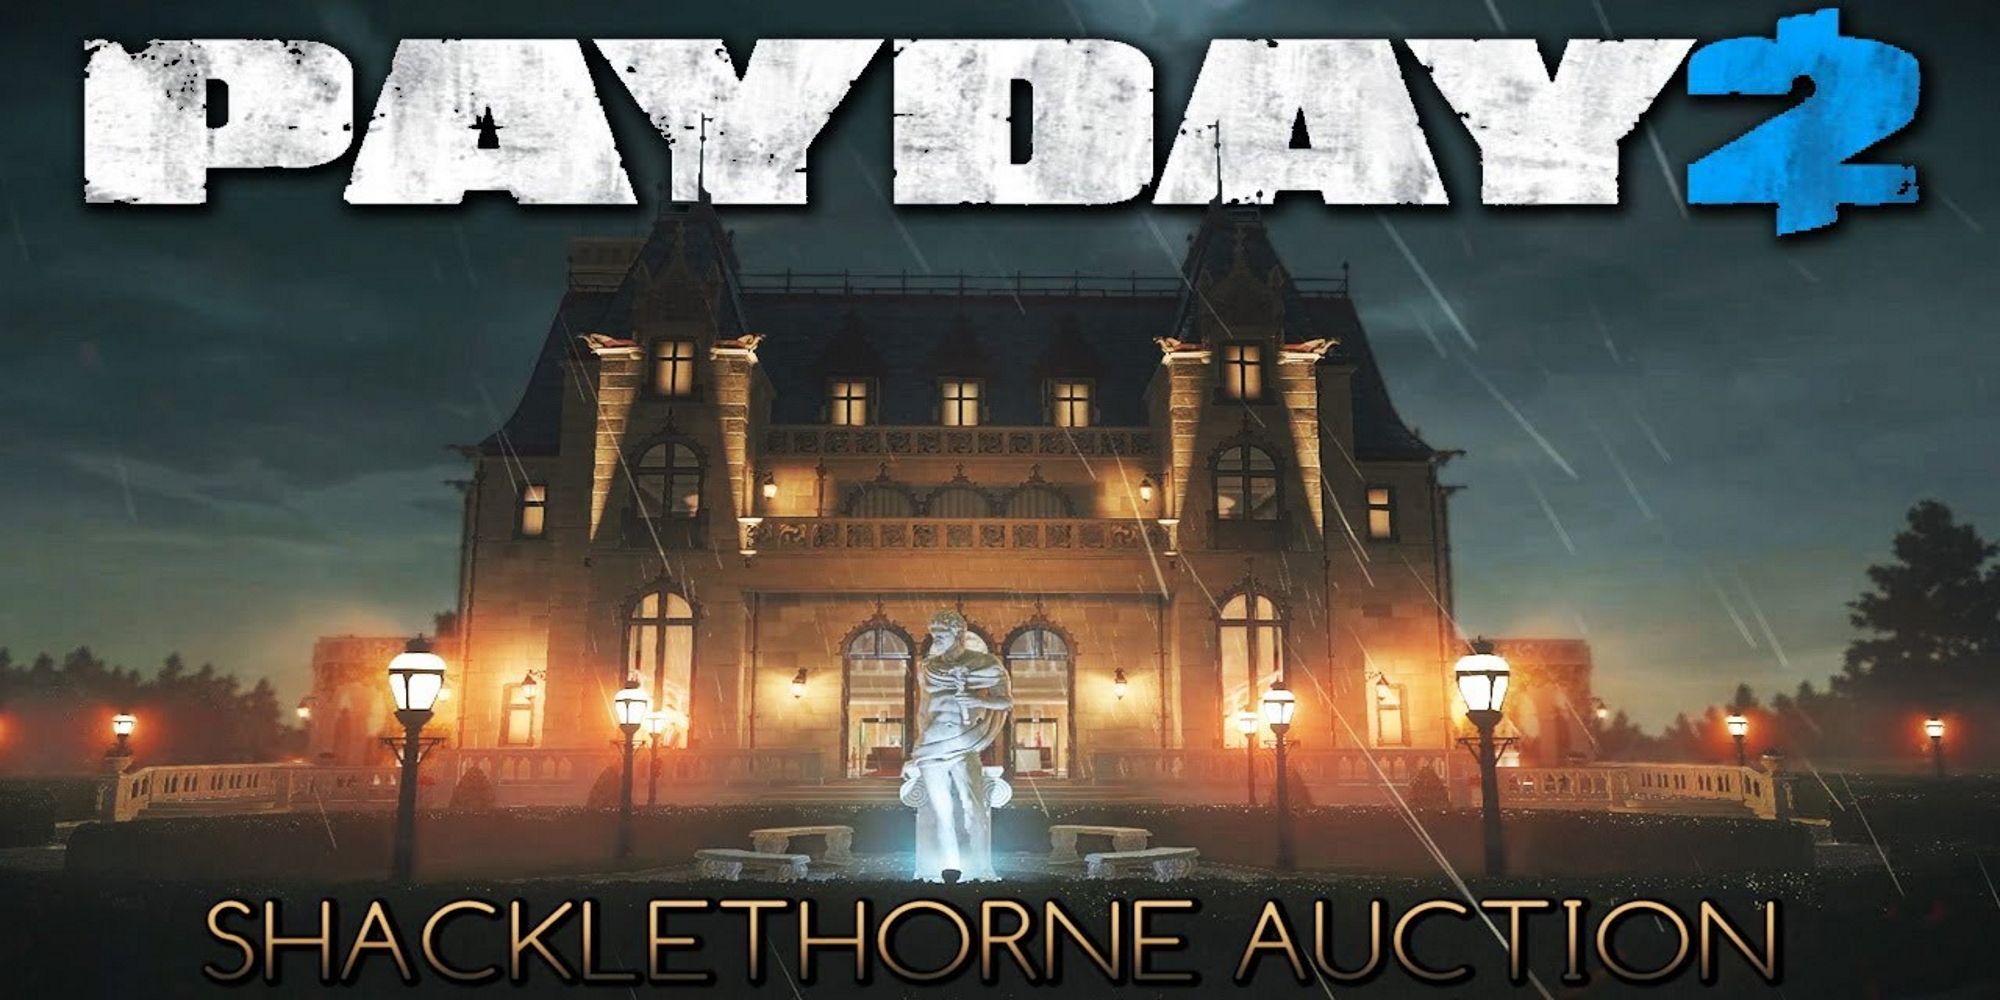 Promotional Image for Shacklethorne Auction Heist from PAYDAY 2